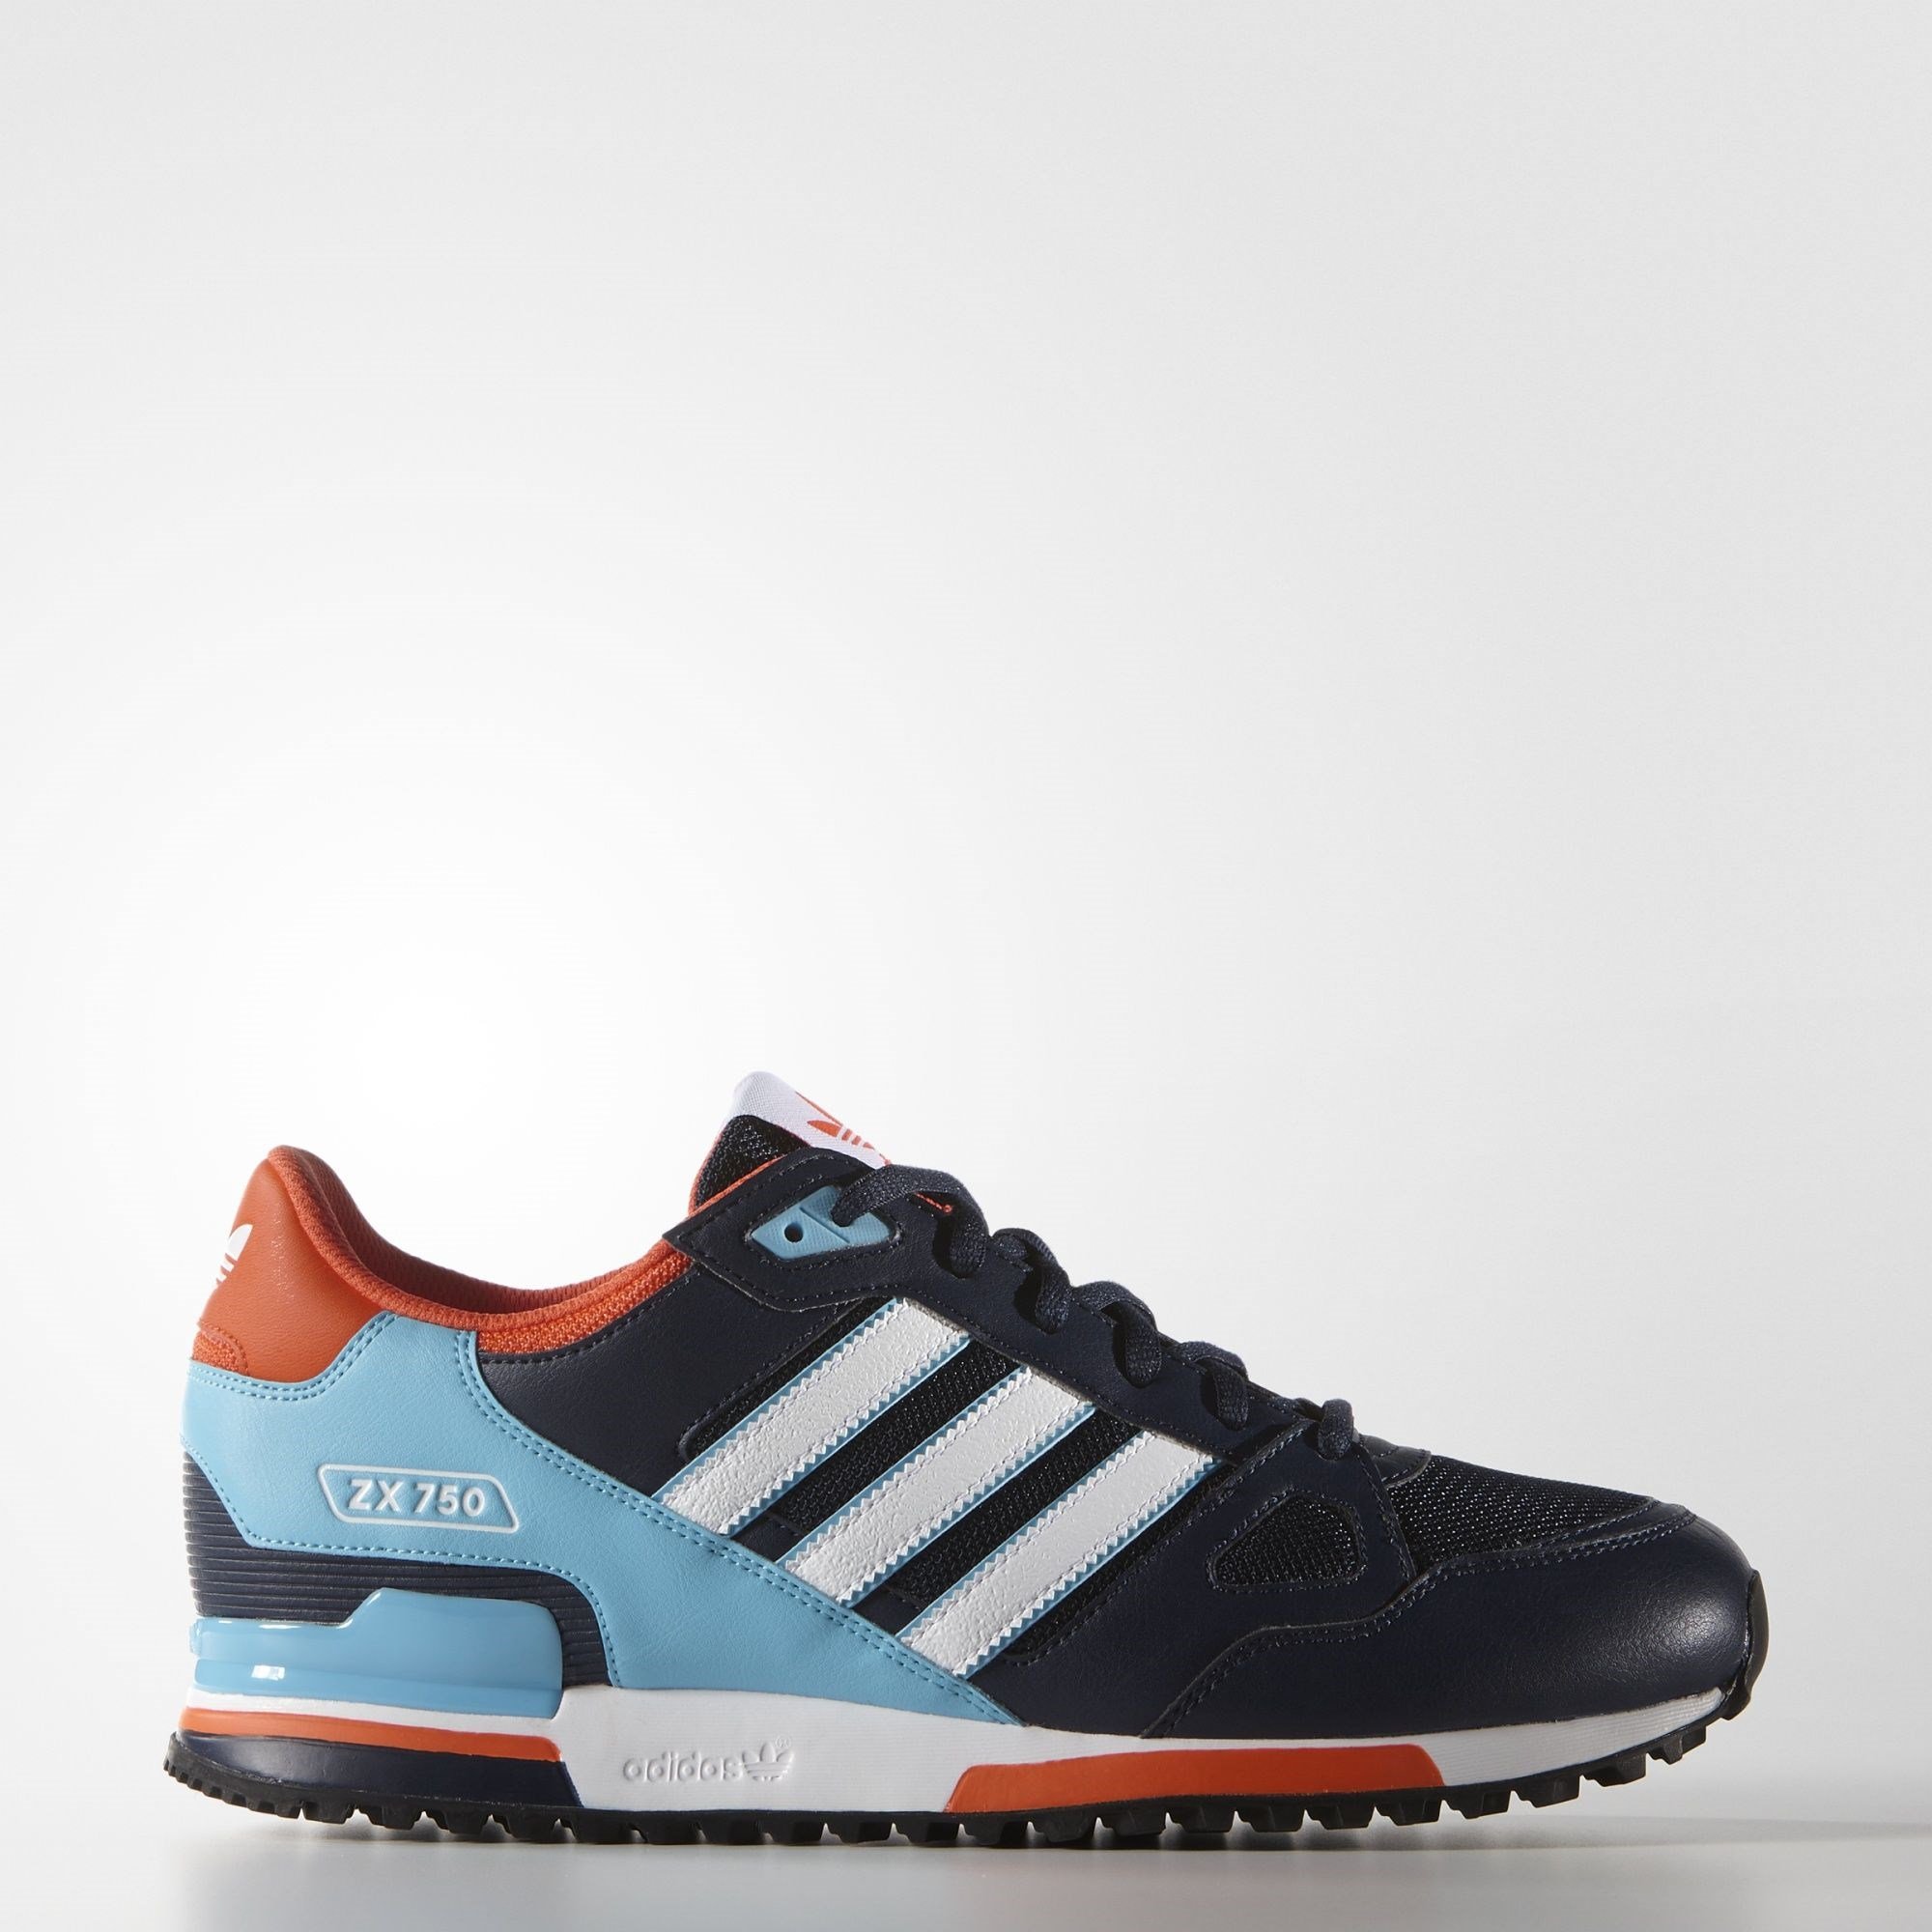 zx 750 s79194